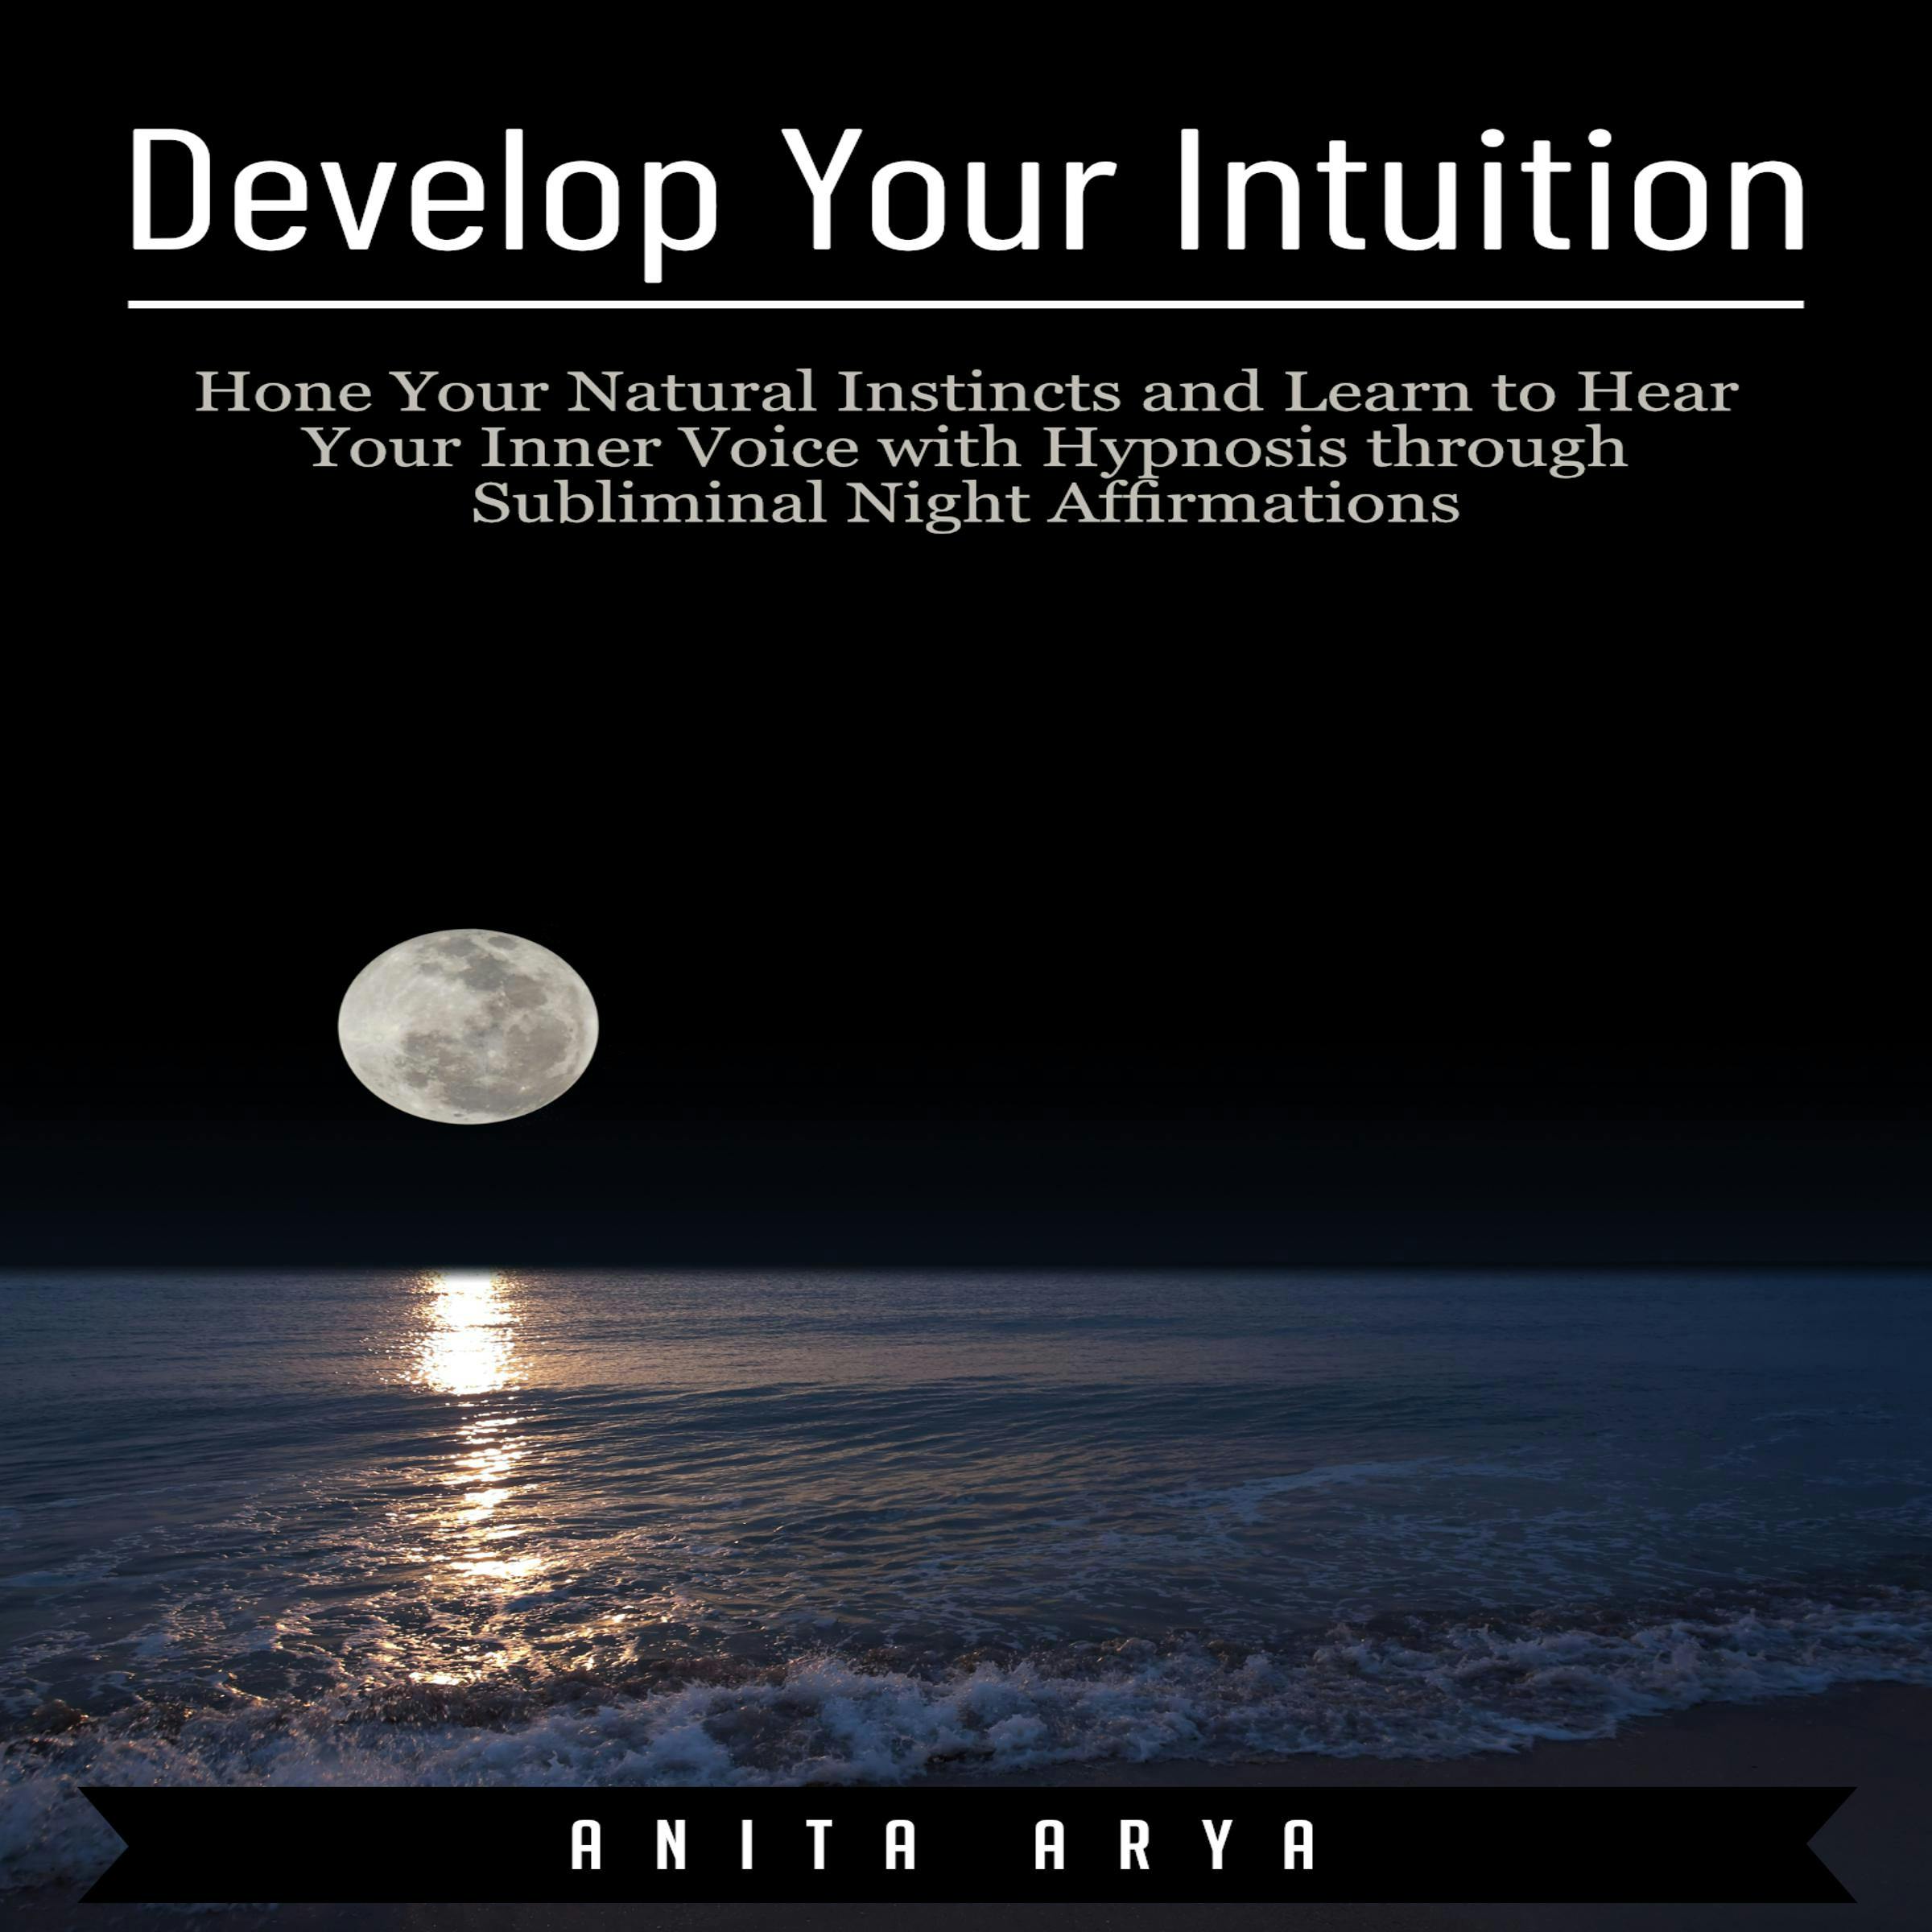 Develop Your Intuition: Hone Your Natural Instincts and Learn to Hear Your Inner Voice with Hypnosis through Subliminal Night Affirmations - Anita Arya